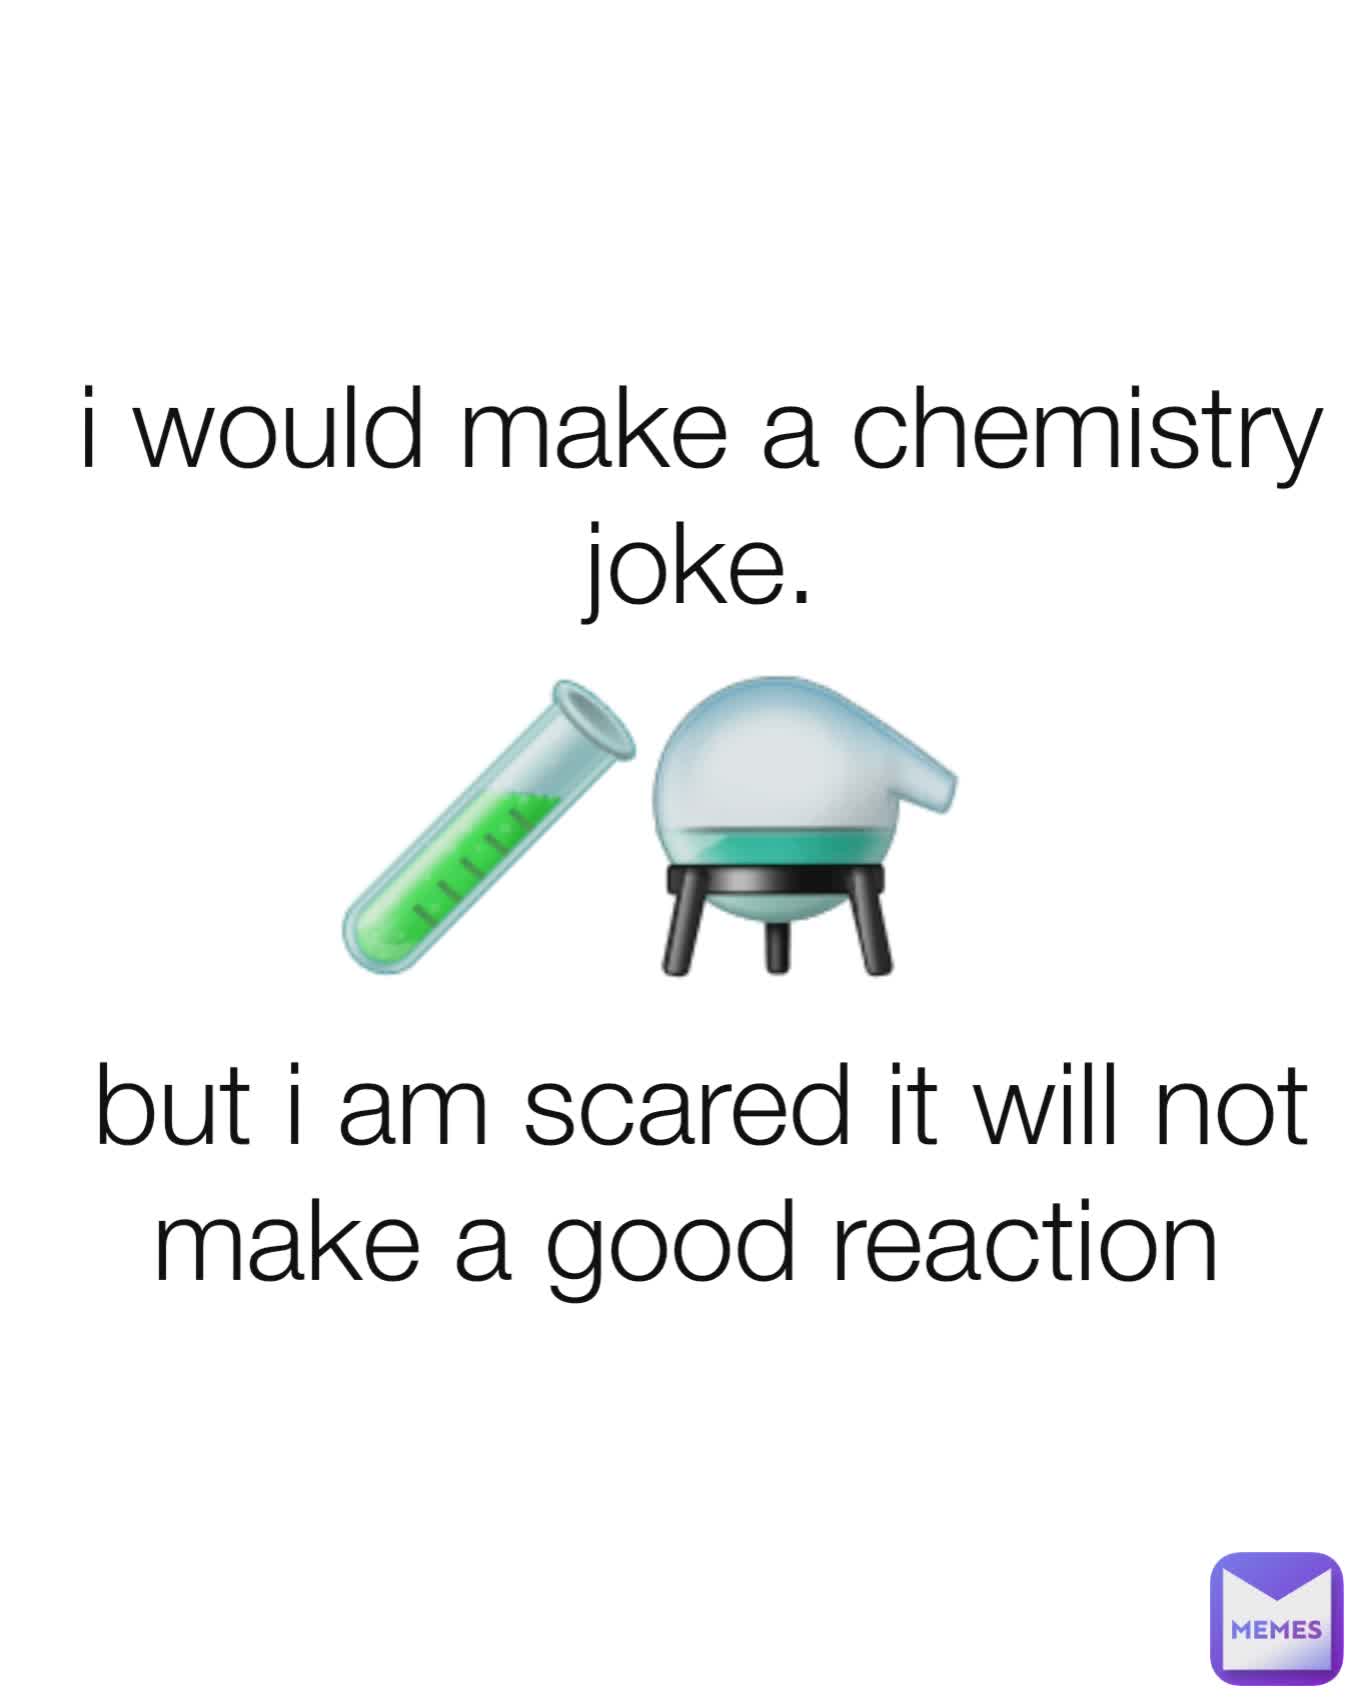 i would make a chemistry joke.



but i am scared it will not make a good reaction  🧪⚗